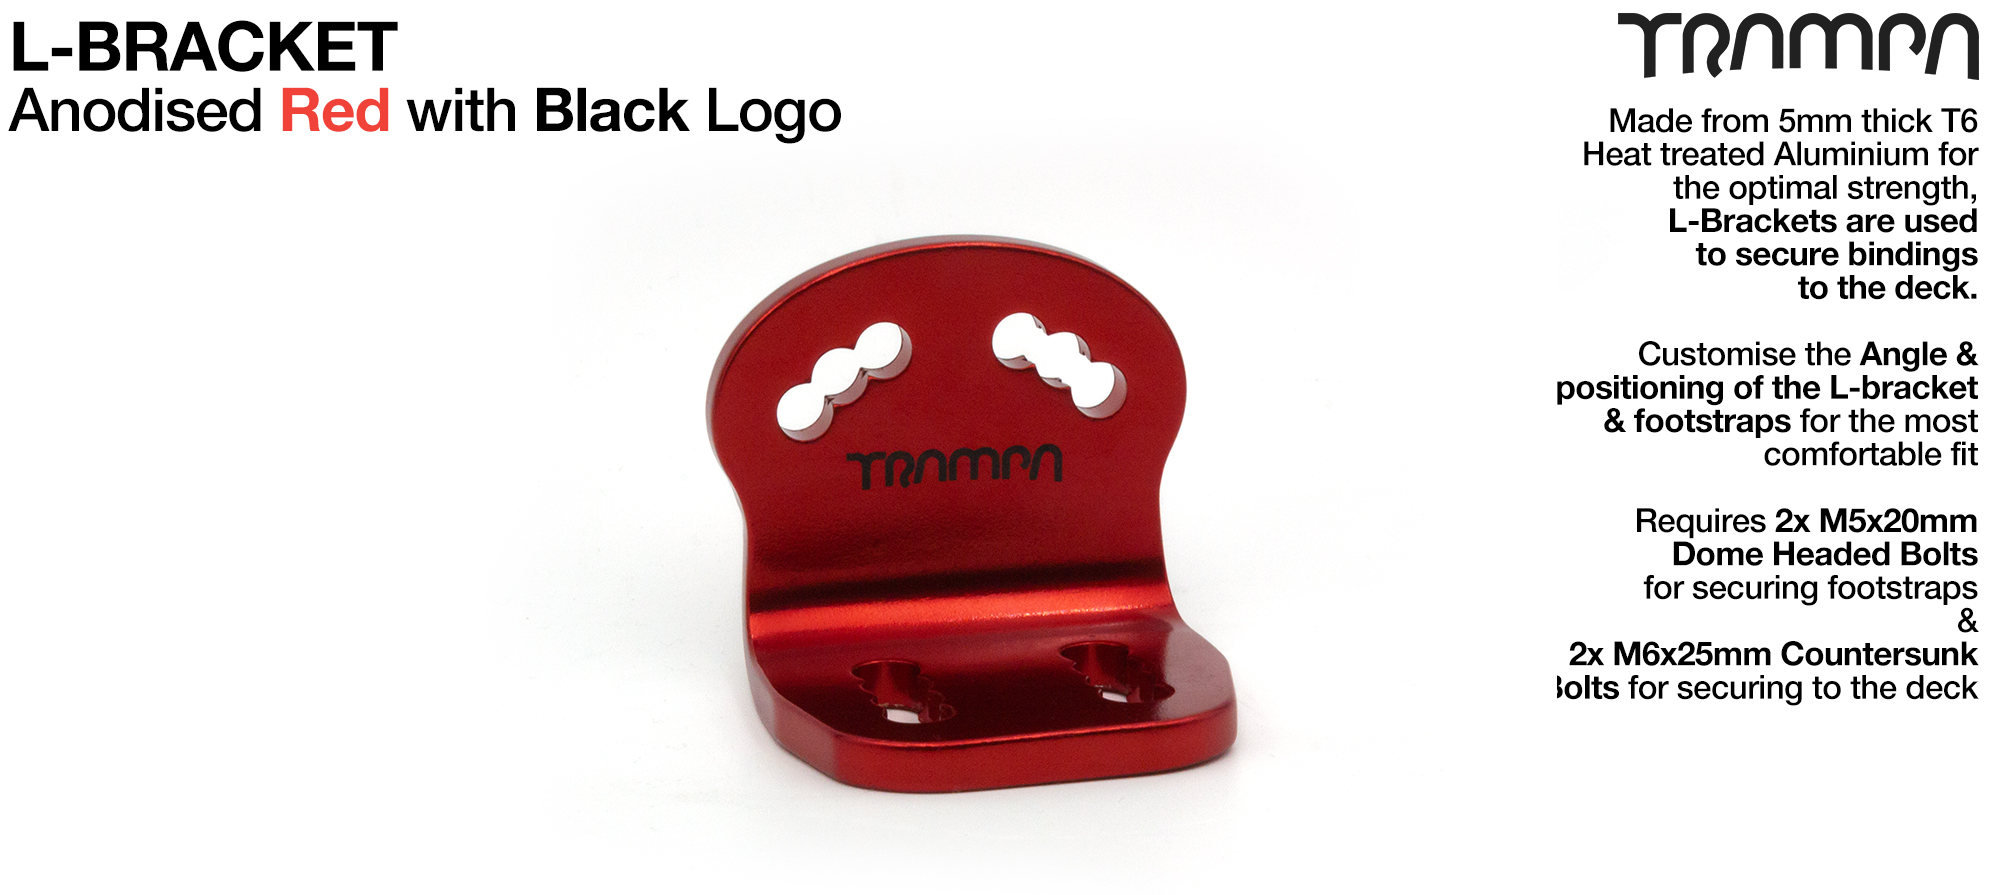 L Bracket - Anodised RED with BLACK logo 